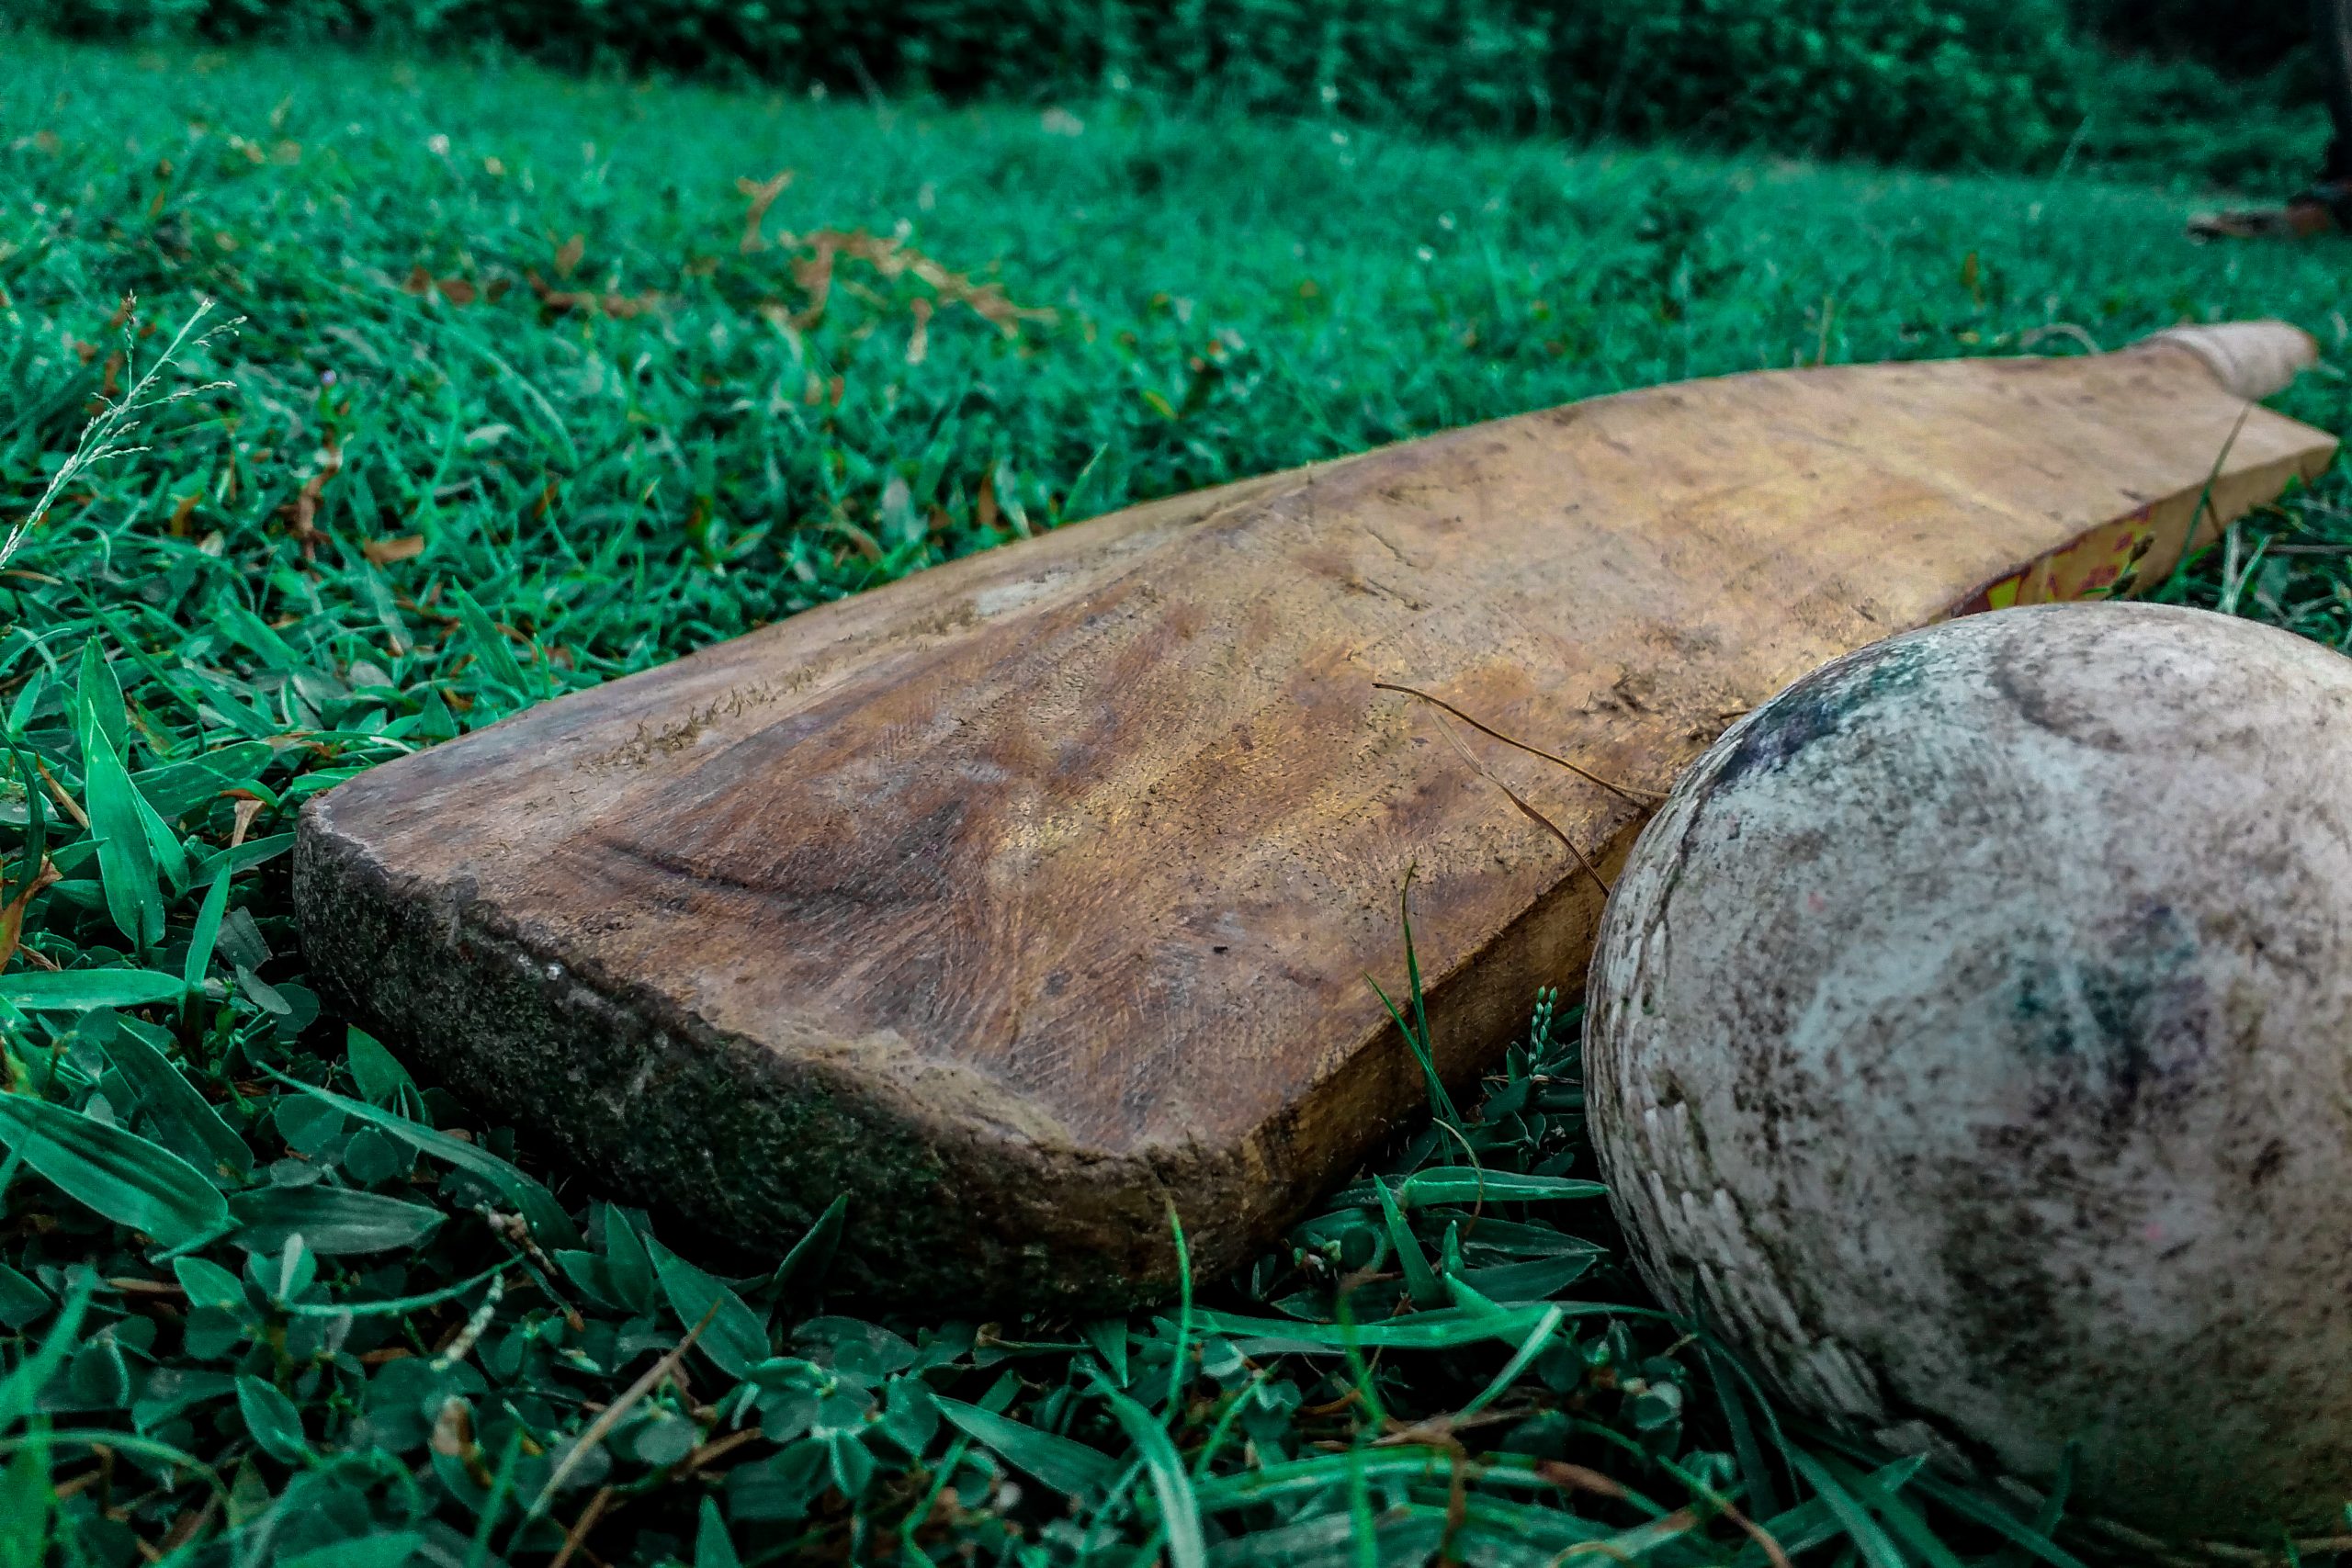 Cricket bat and ball on the ground